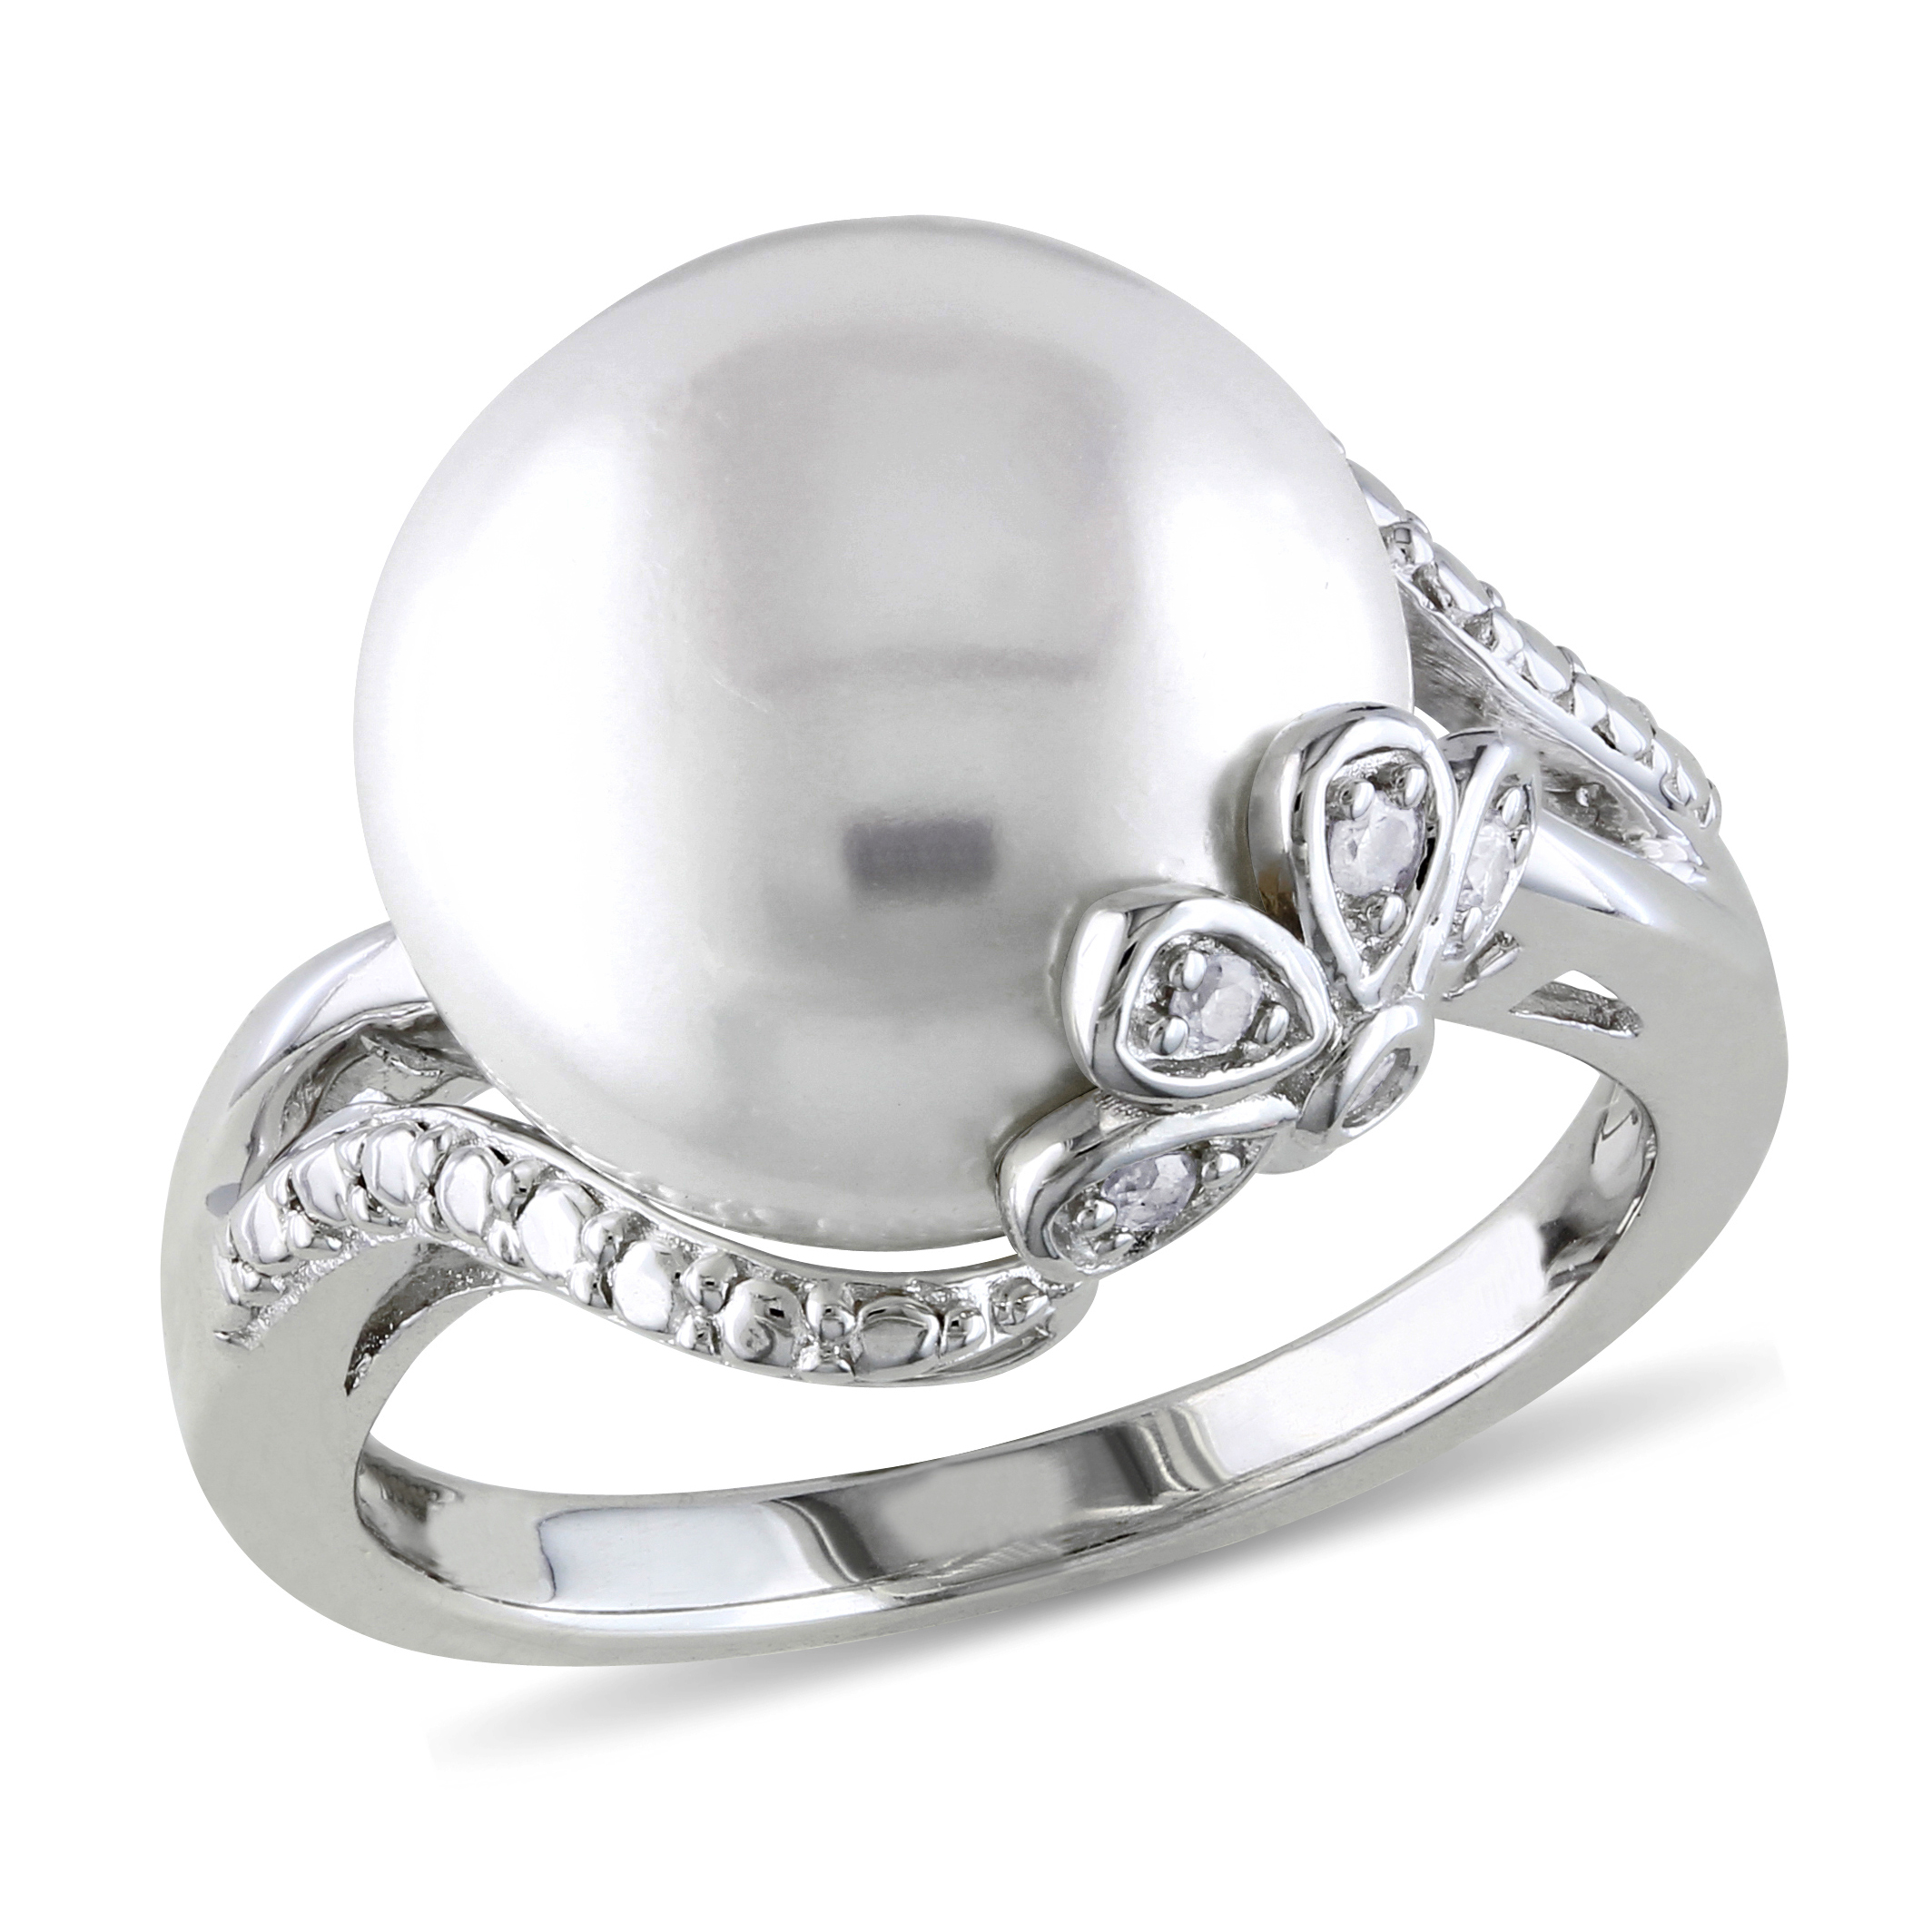 12 - 12.5 MM White Cultured Freshwater Pearl Ring with Diamonds in Sterling Silver